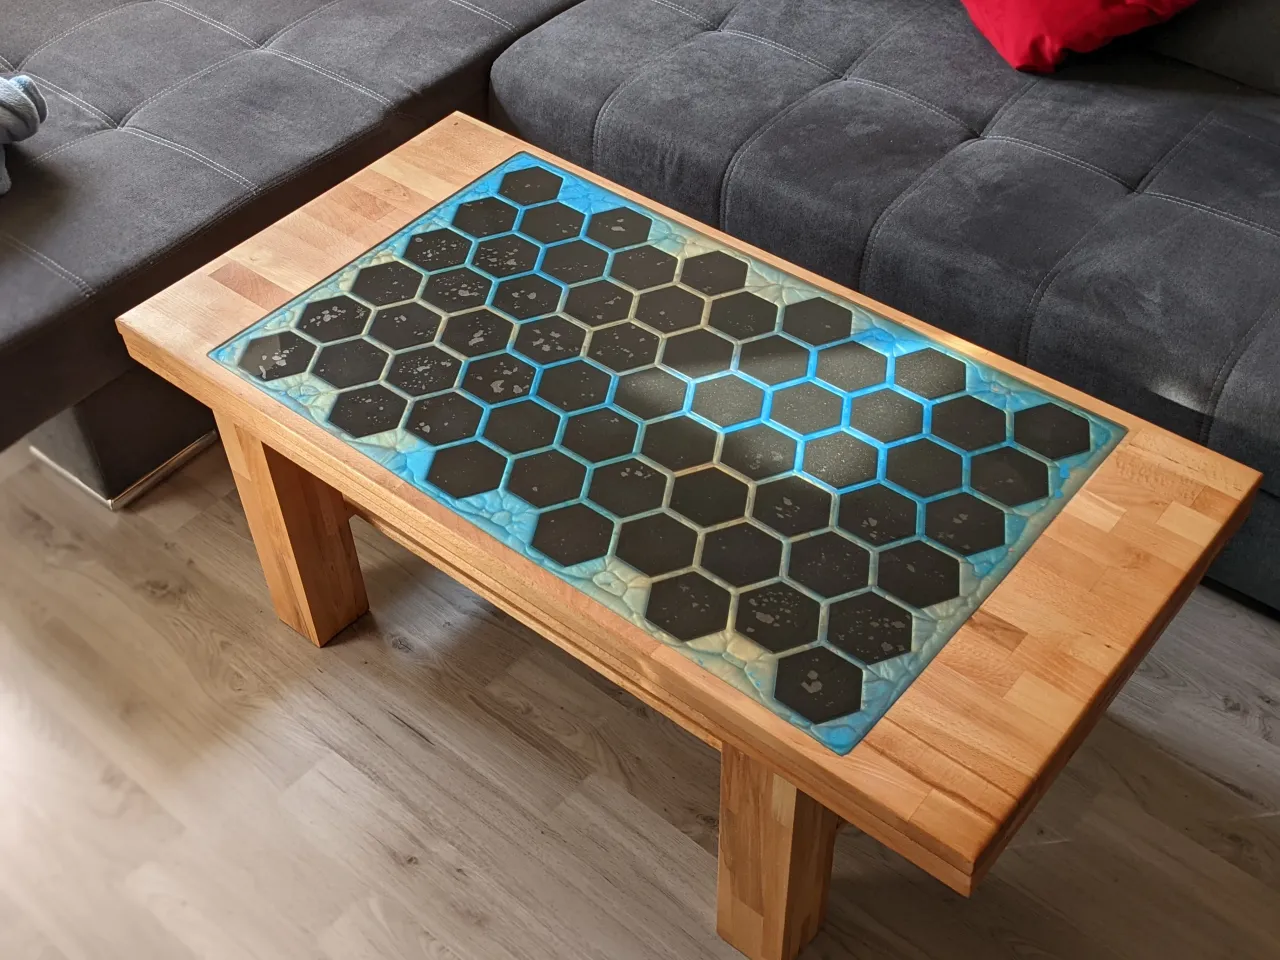 Hexagon LED coffee table by Mazls92